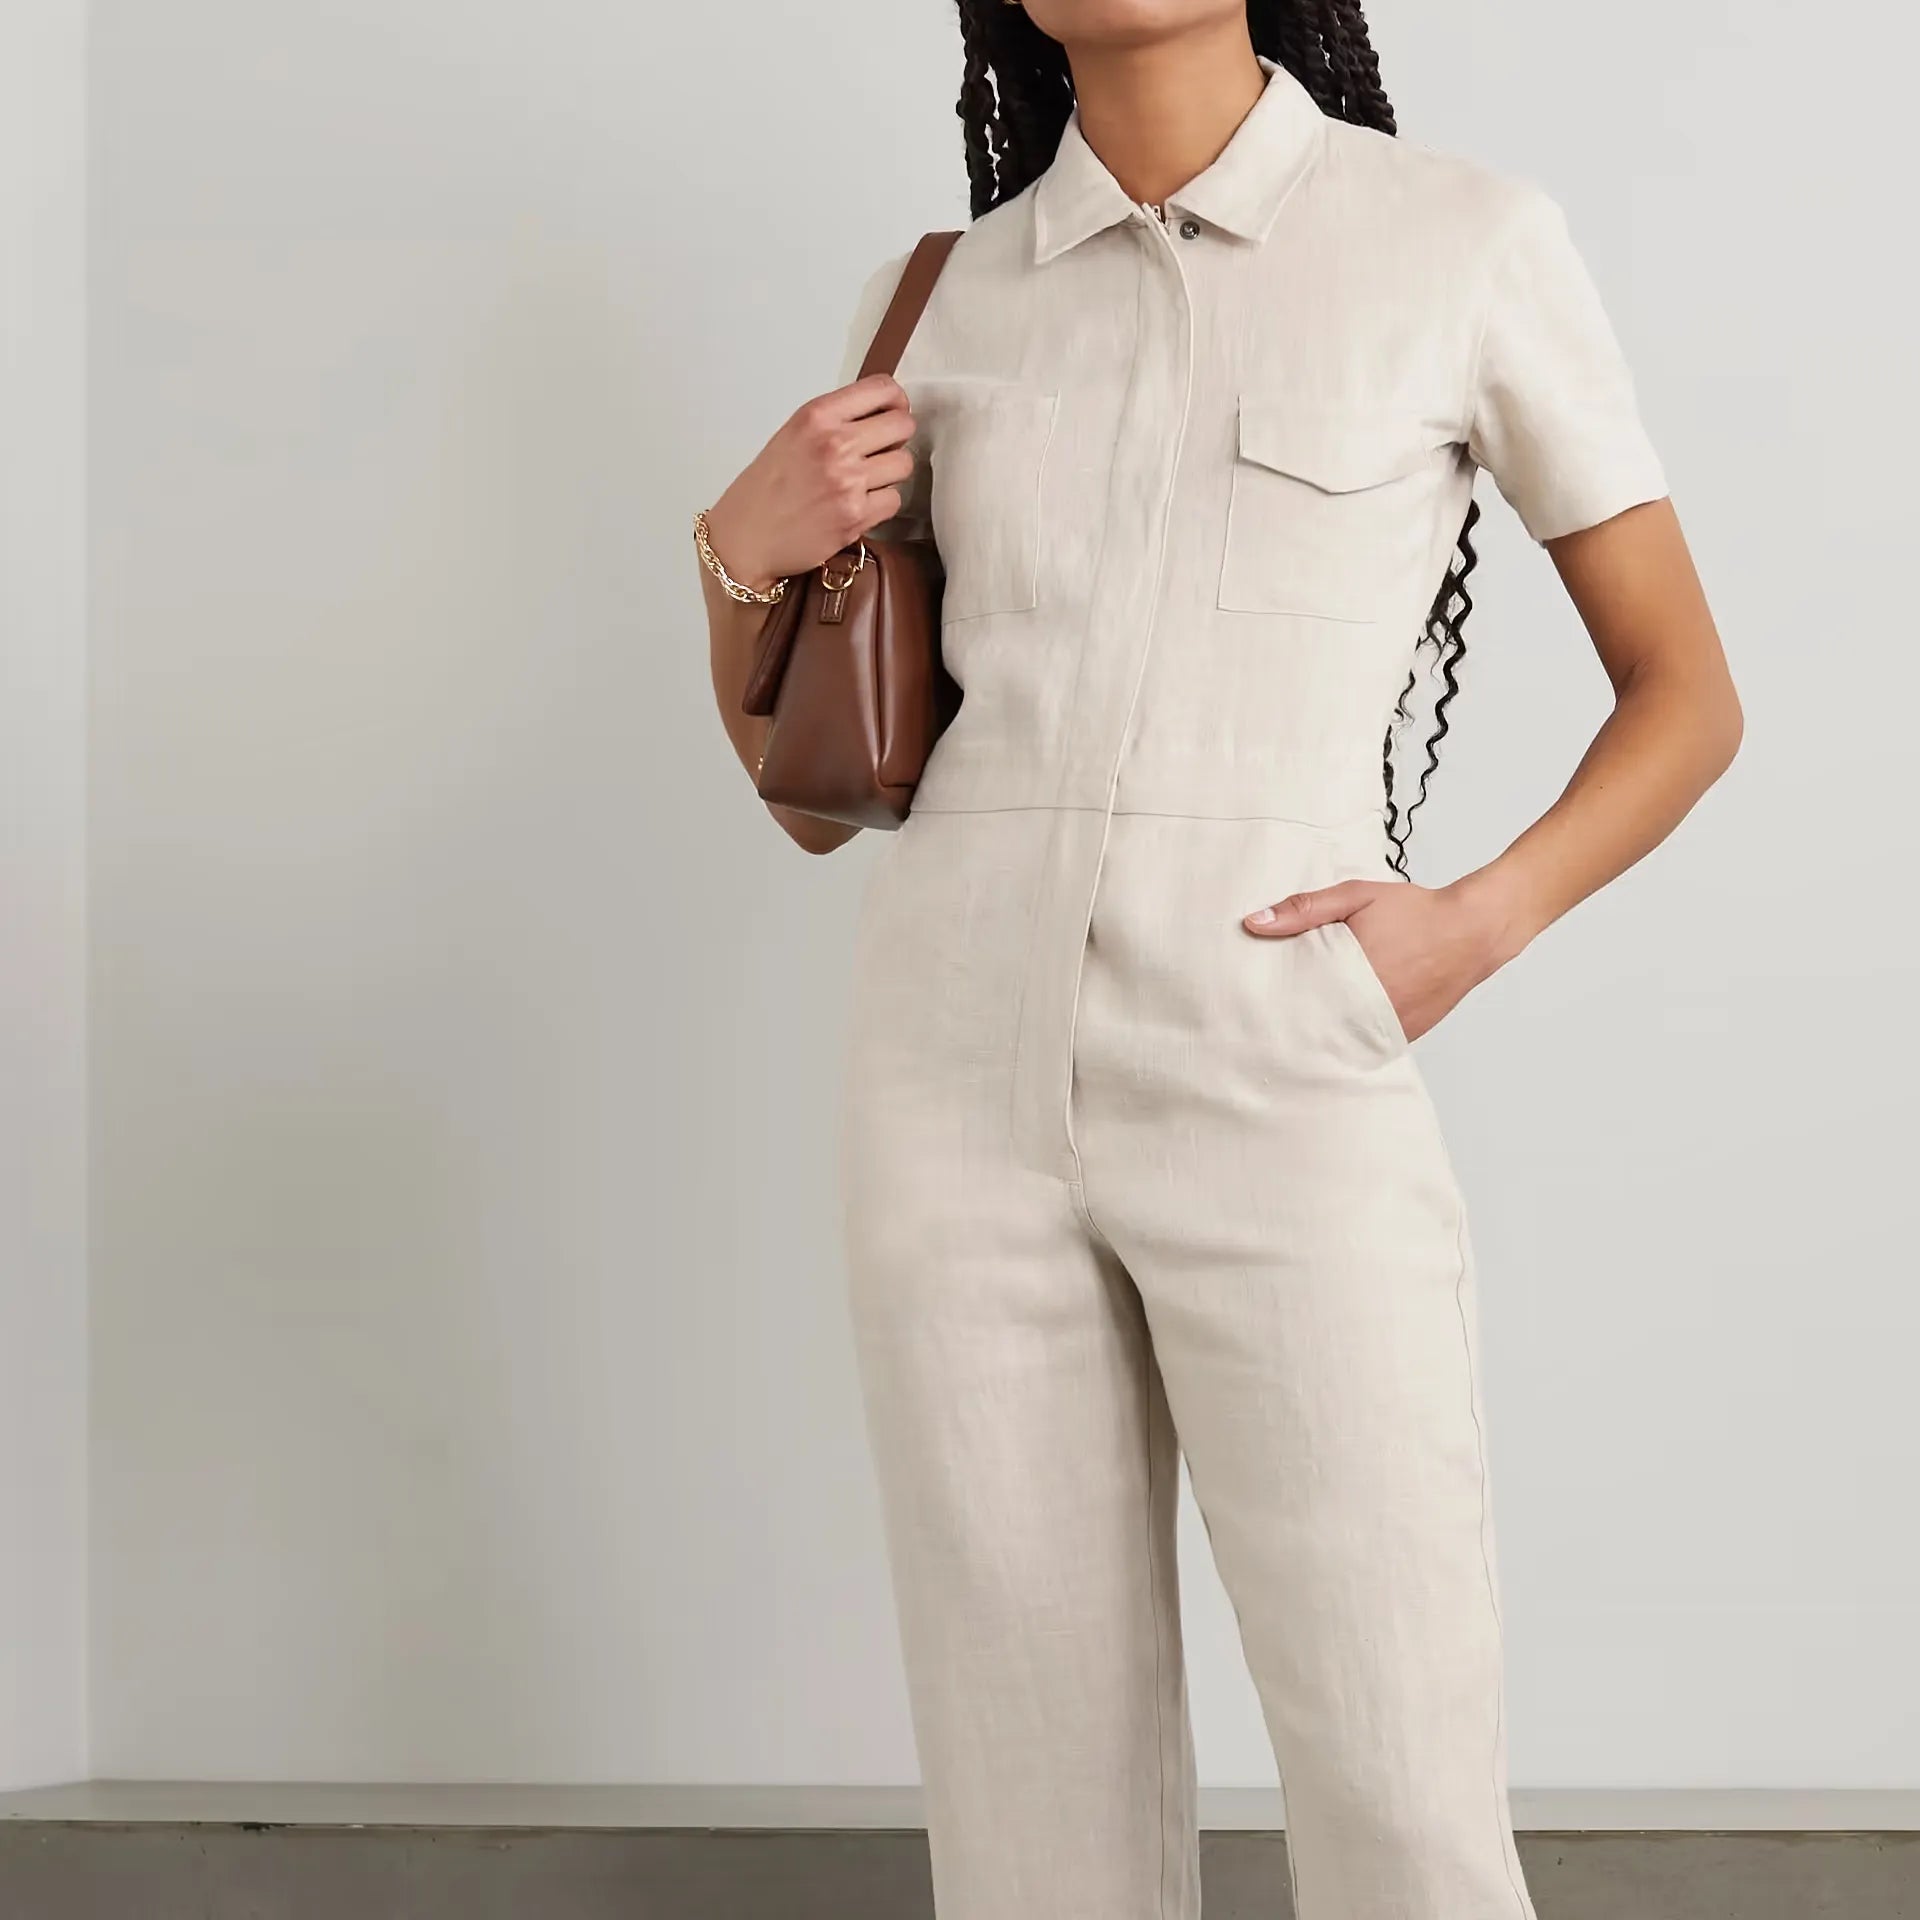 GLAMOUR Feature |  Rivet Utility is one of the 21 best boiler suits for women